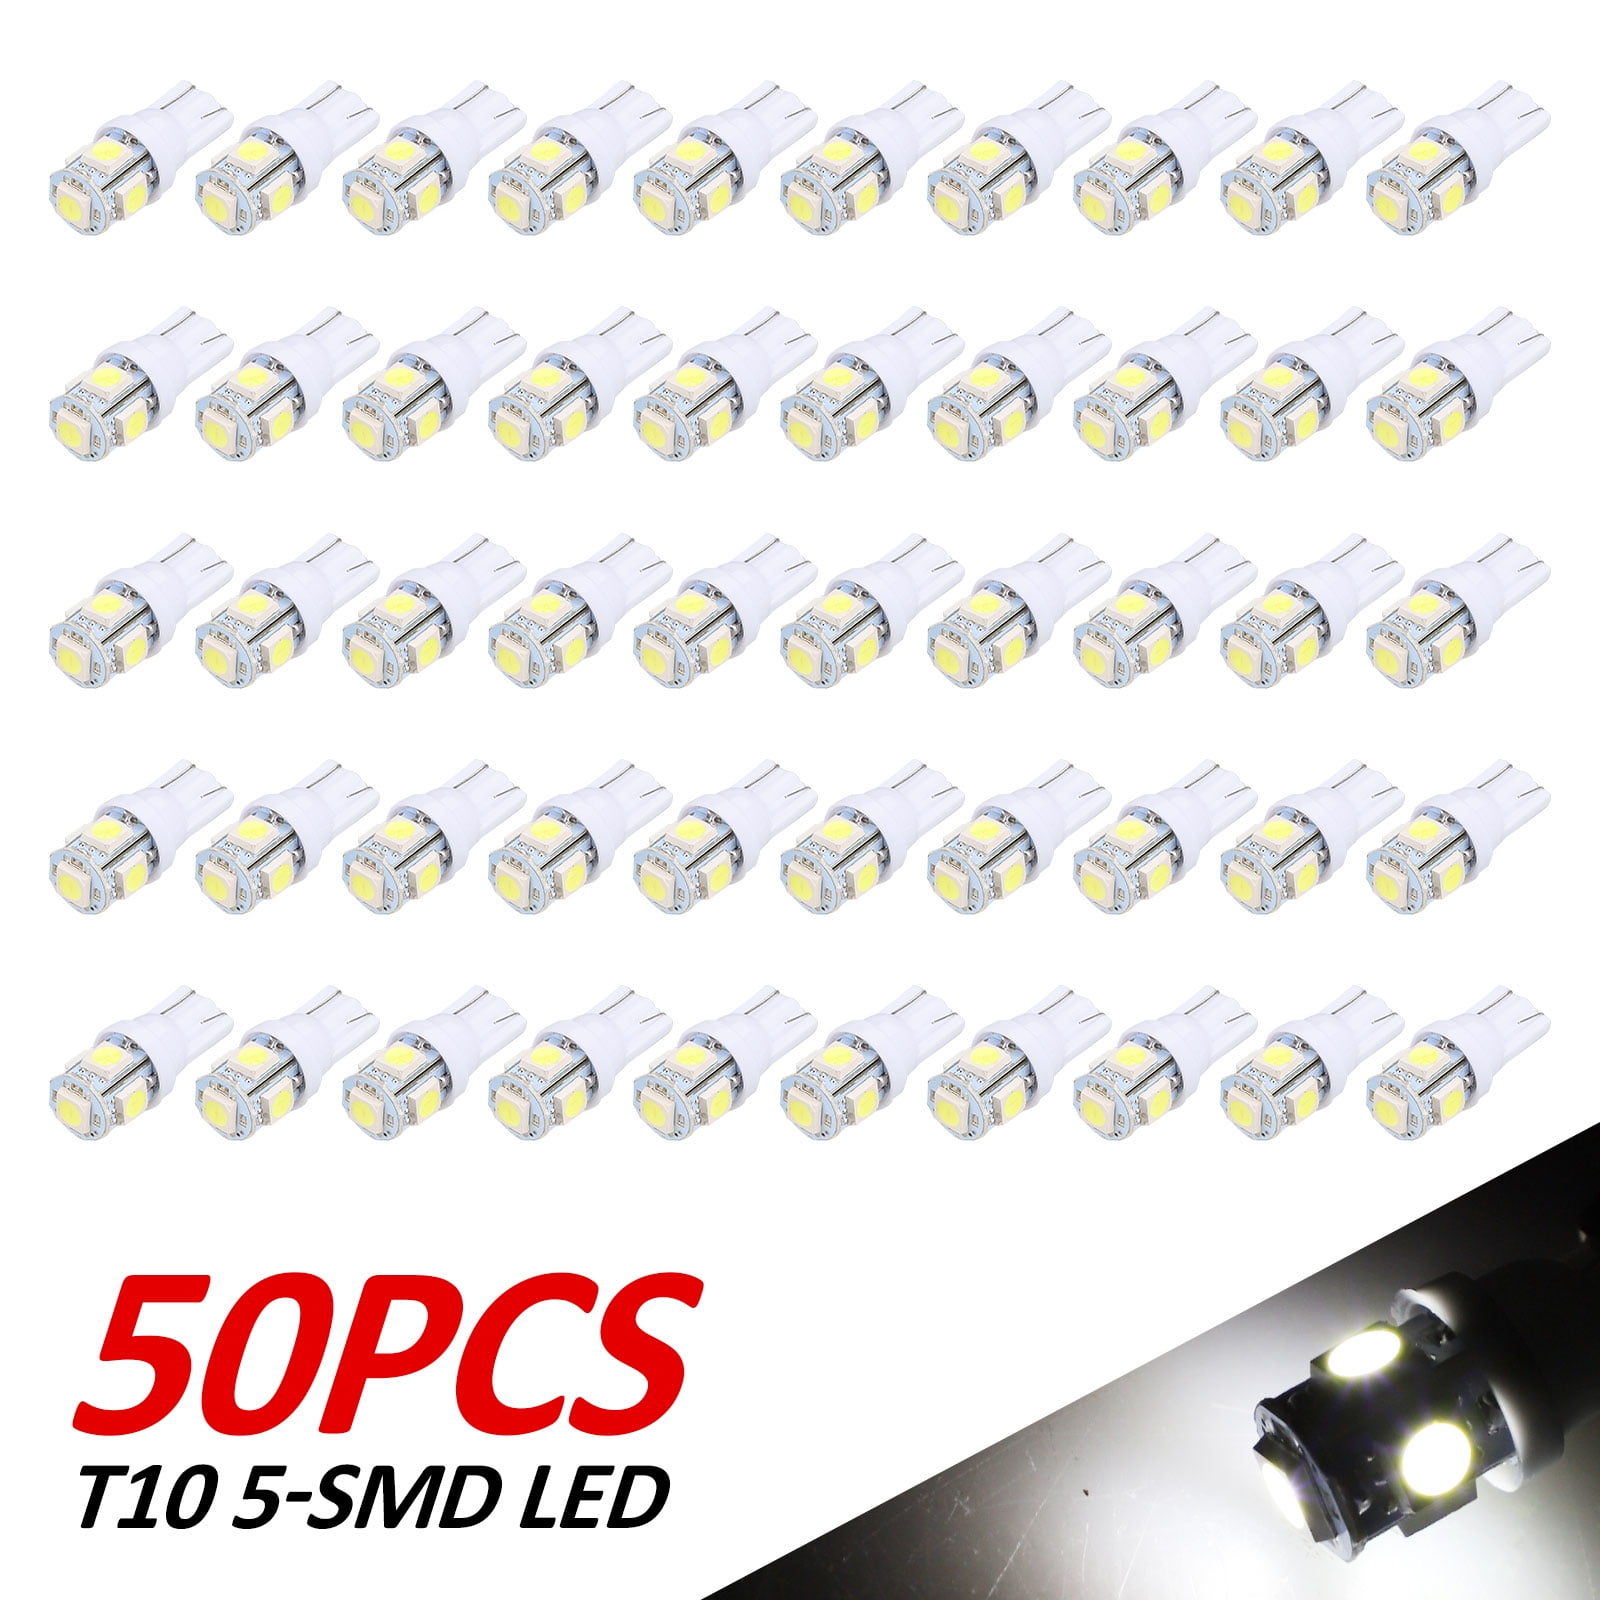 2xLED 1156 382 Canbus White 48x 2835 SMD Fits Interior Light Ford Escort MK4 1.6 